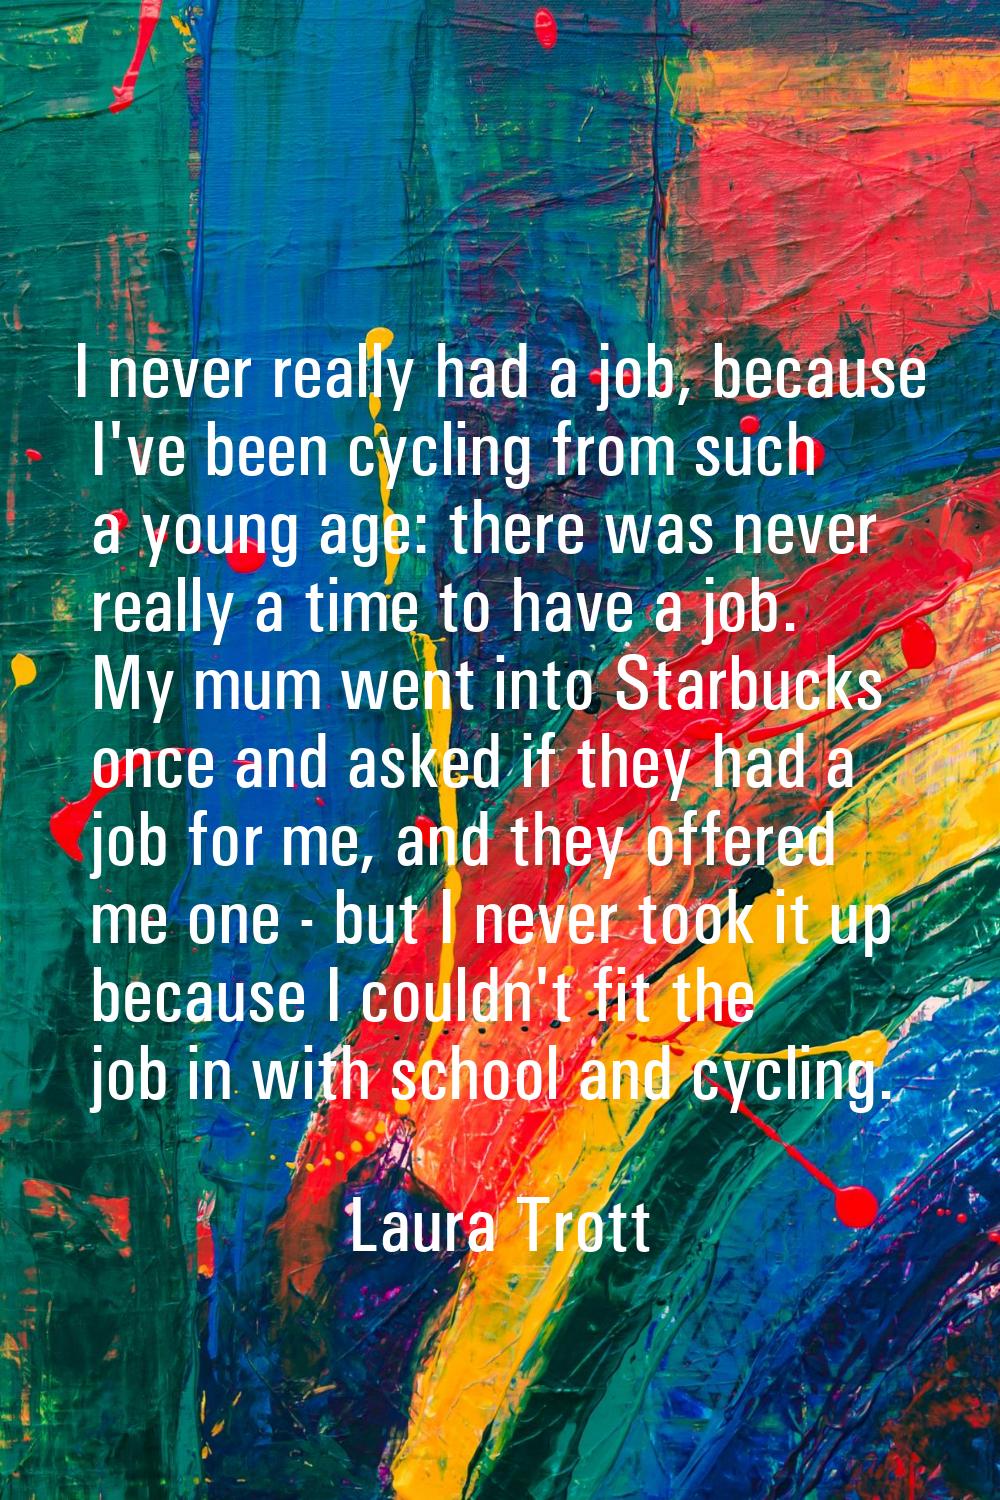 I never really had a job, because I've been cycling from such a young age: there was never really a